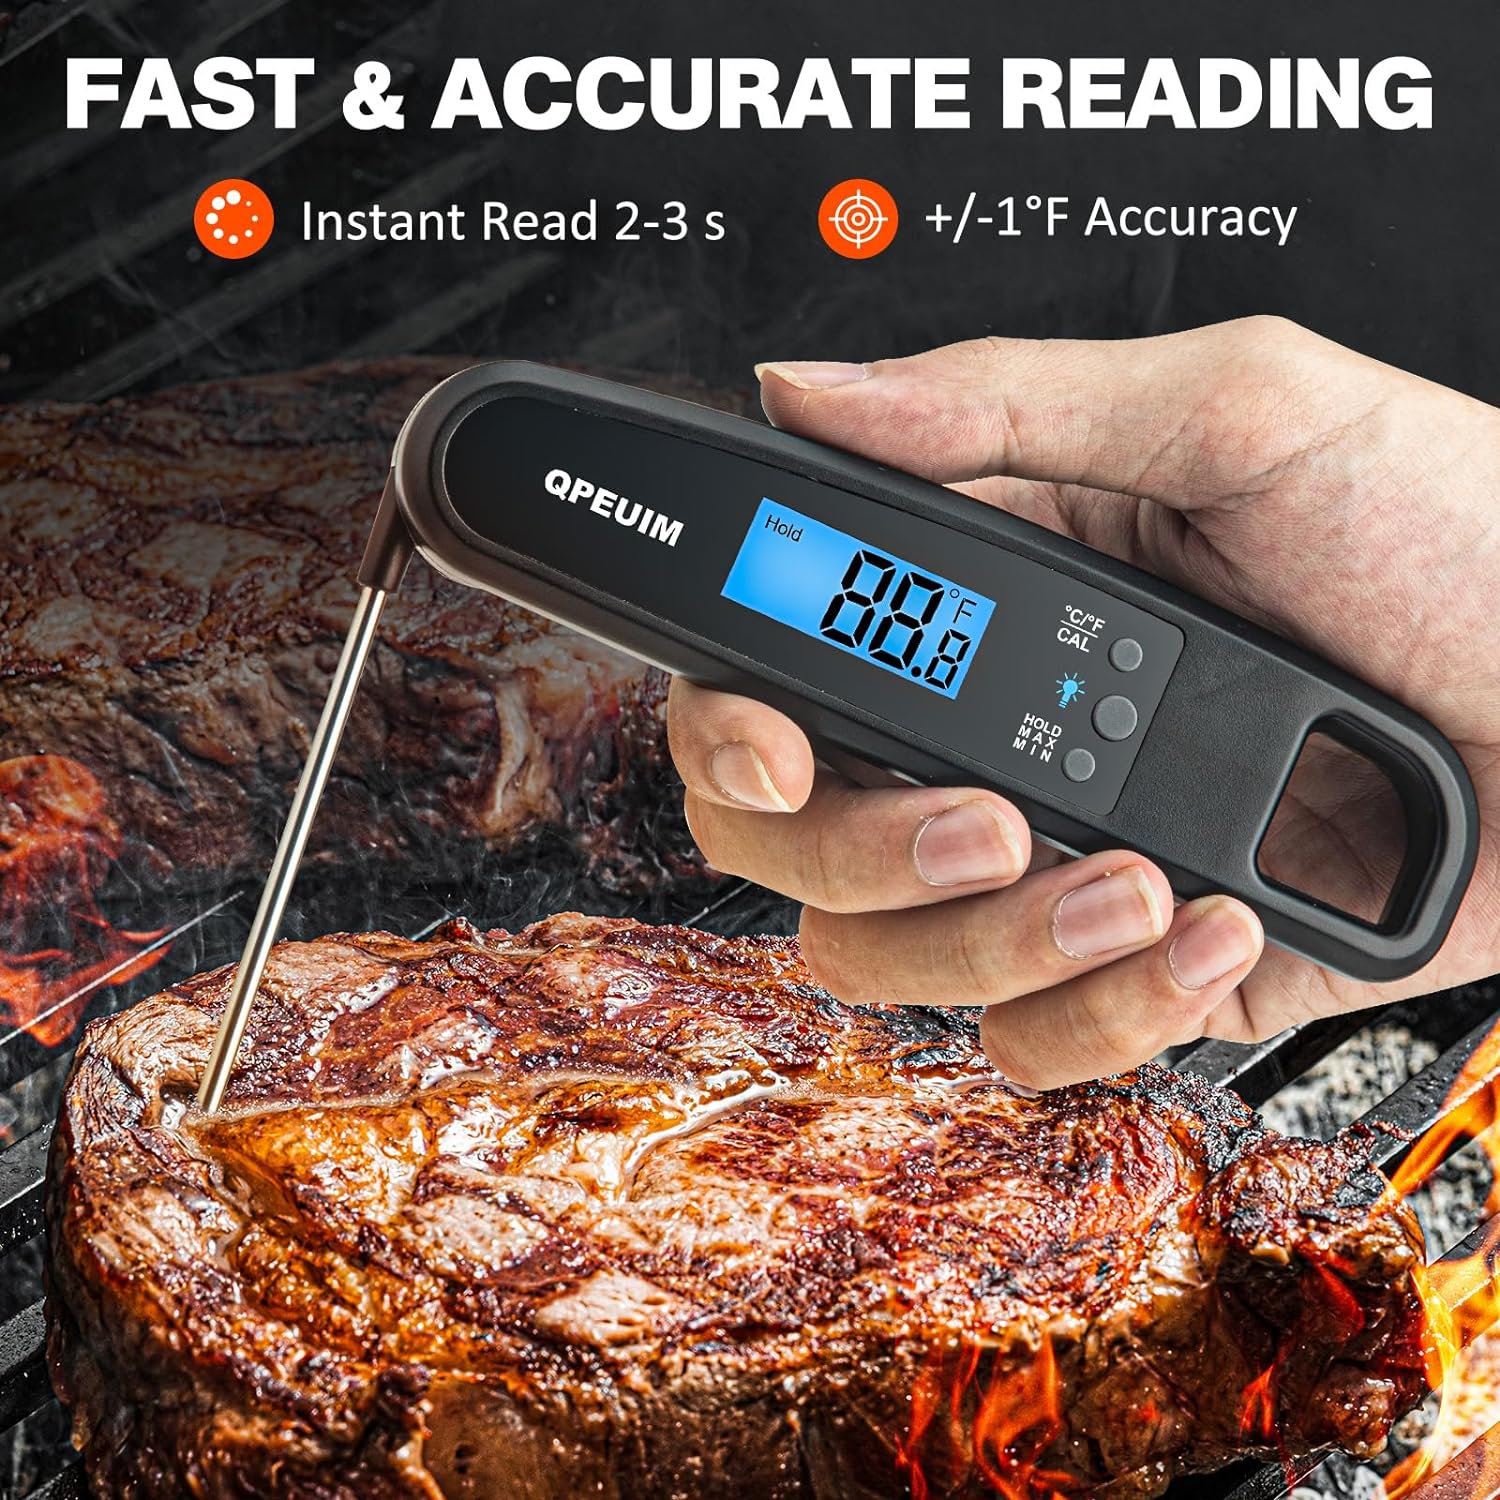 Digital Meat Thermometer Instant Read Meat Thermometer for Cooking Kitchen Food Candy with Backlight and Magnet for Oil Deep Fry BBQ Grill Smoker Thermometer by QPEUIM